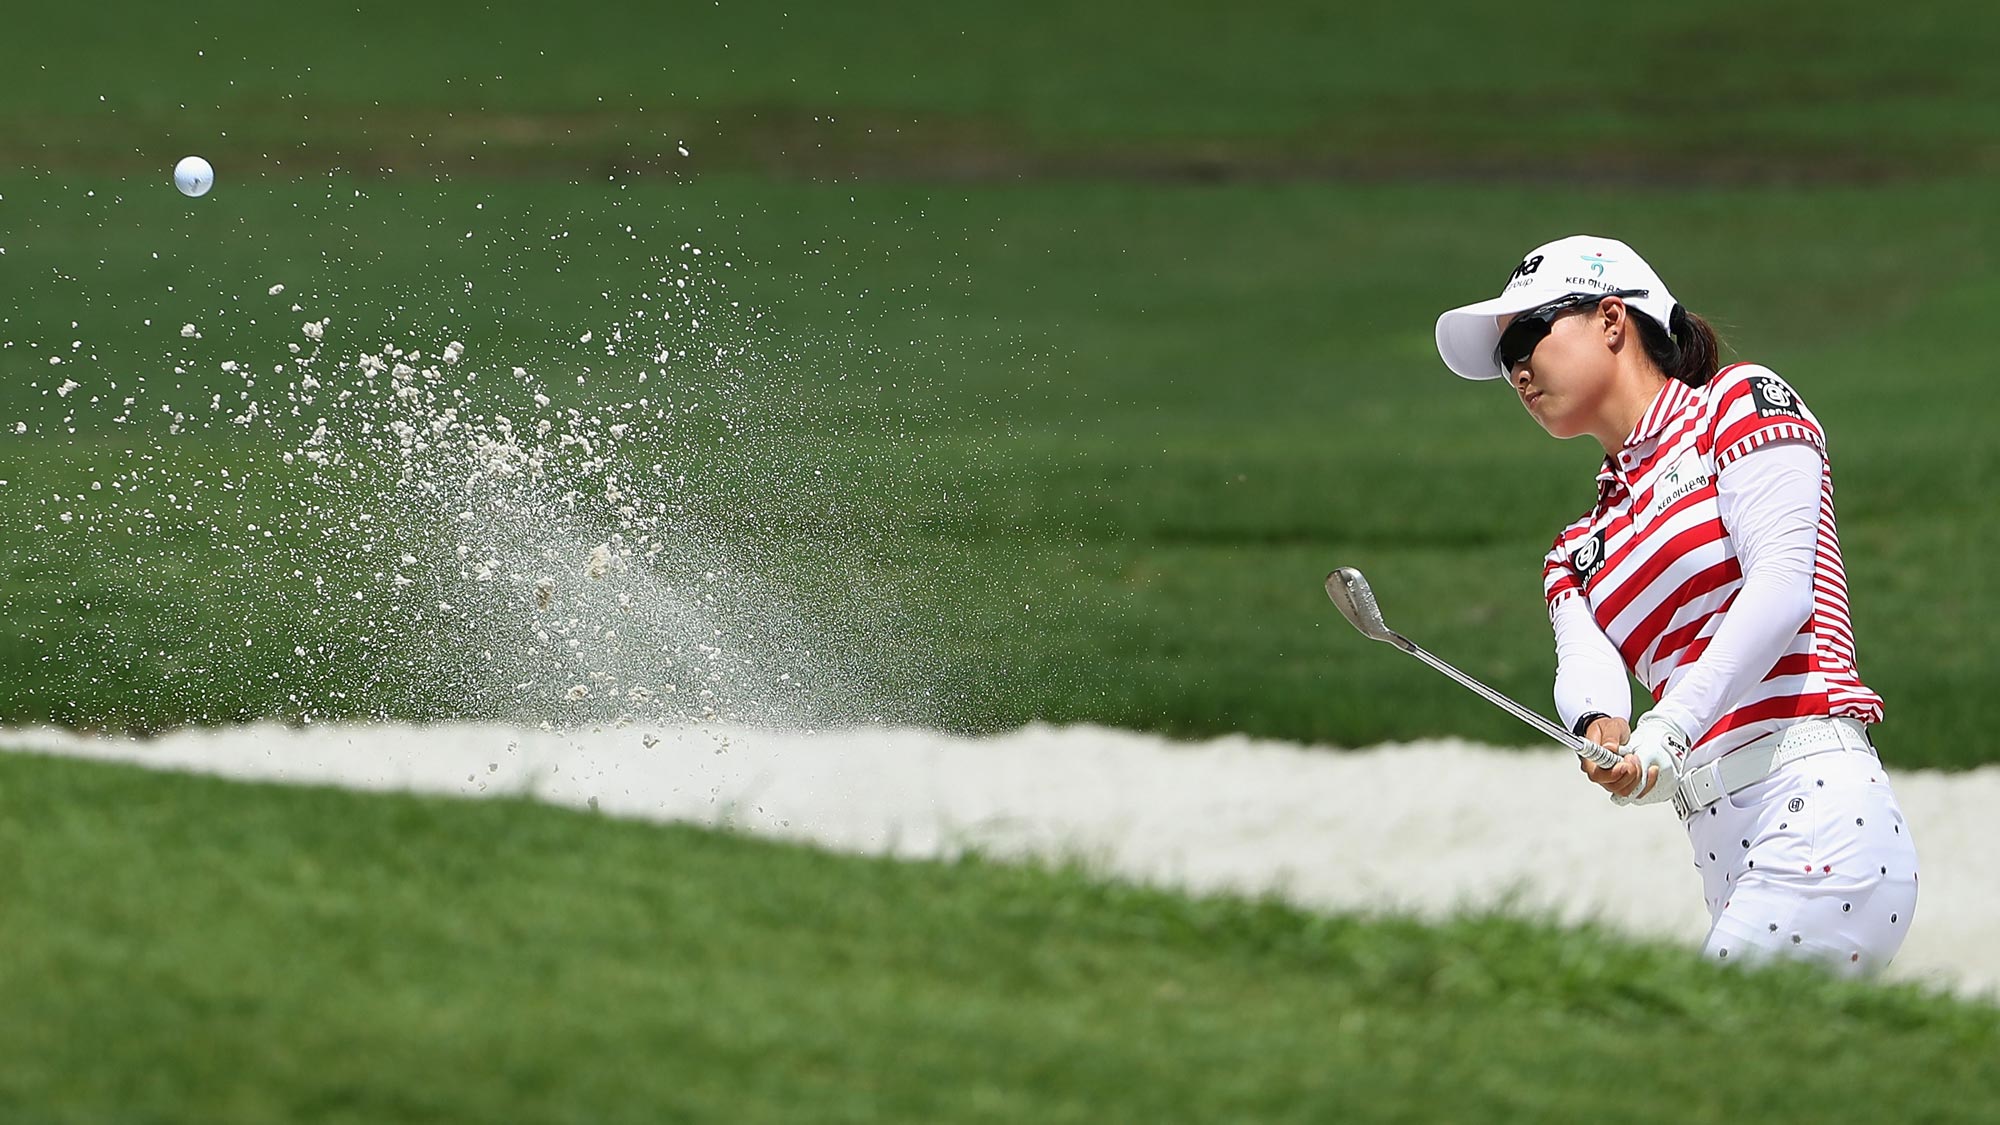 Minjee Lee of Australia chips from the bunker onto the first green during the thrid round of the 2018 U.S. Women's Open